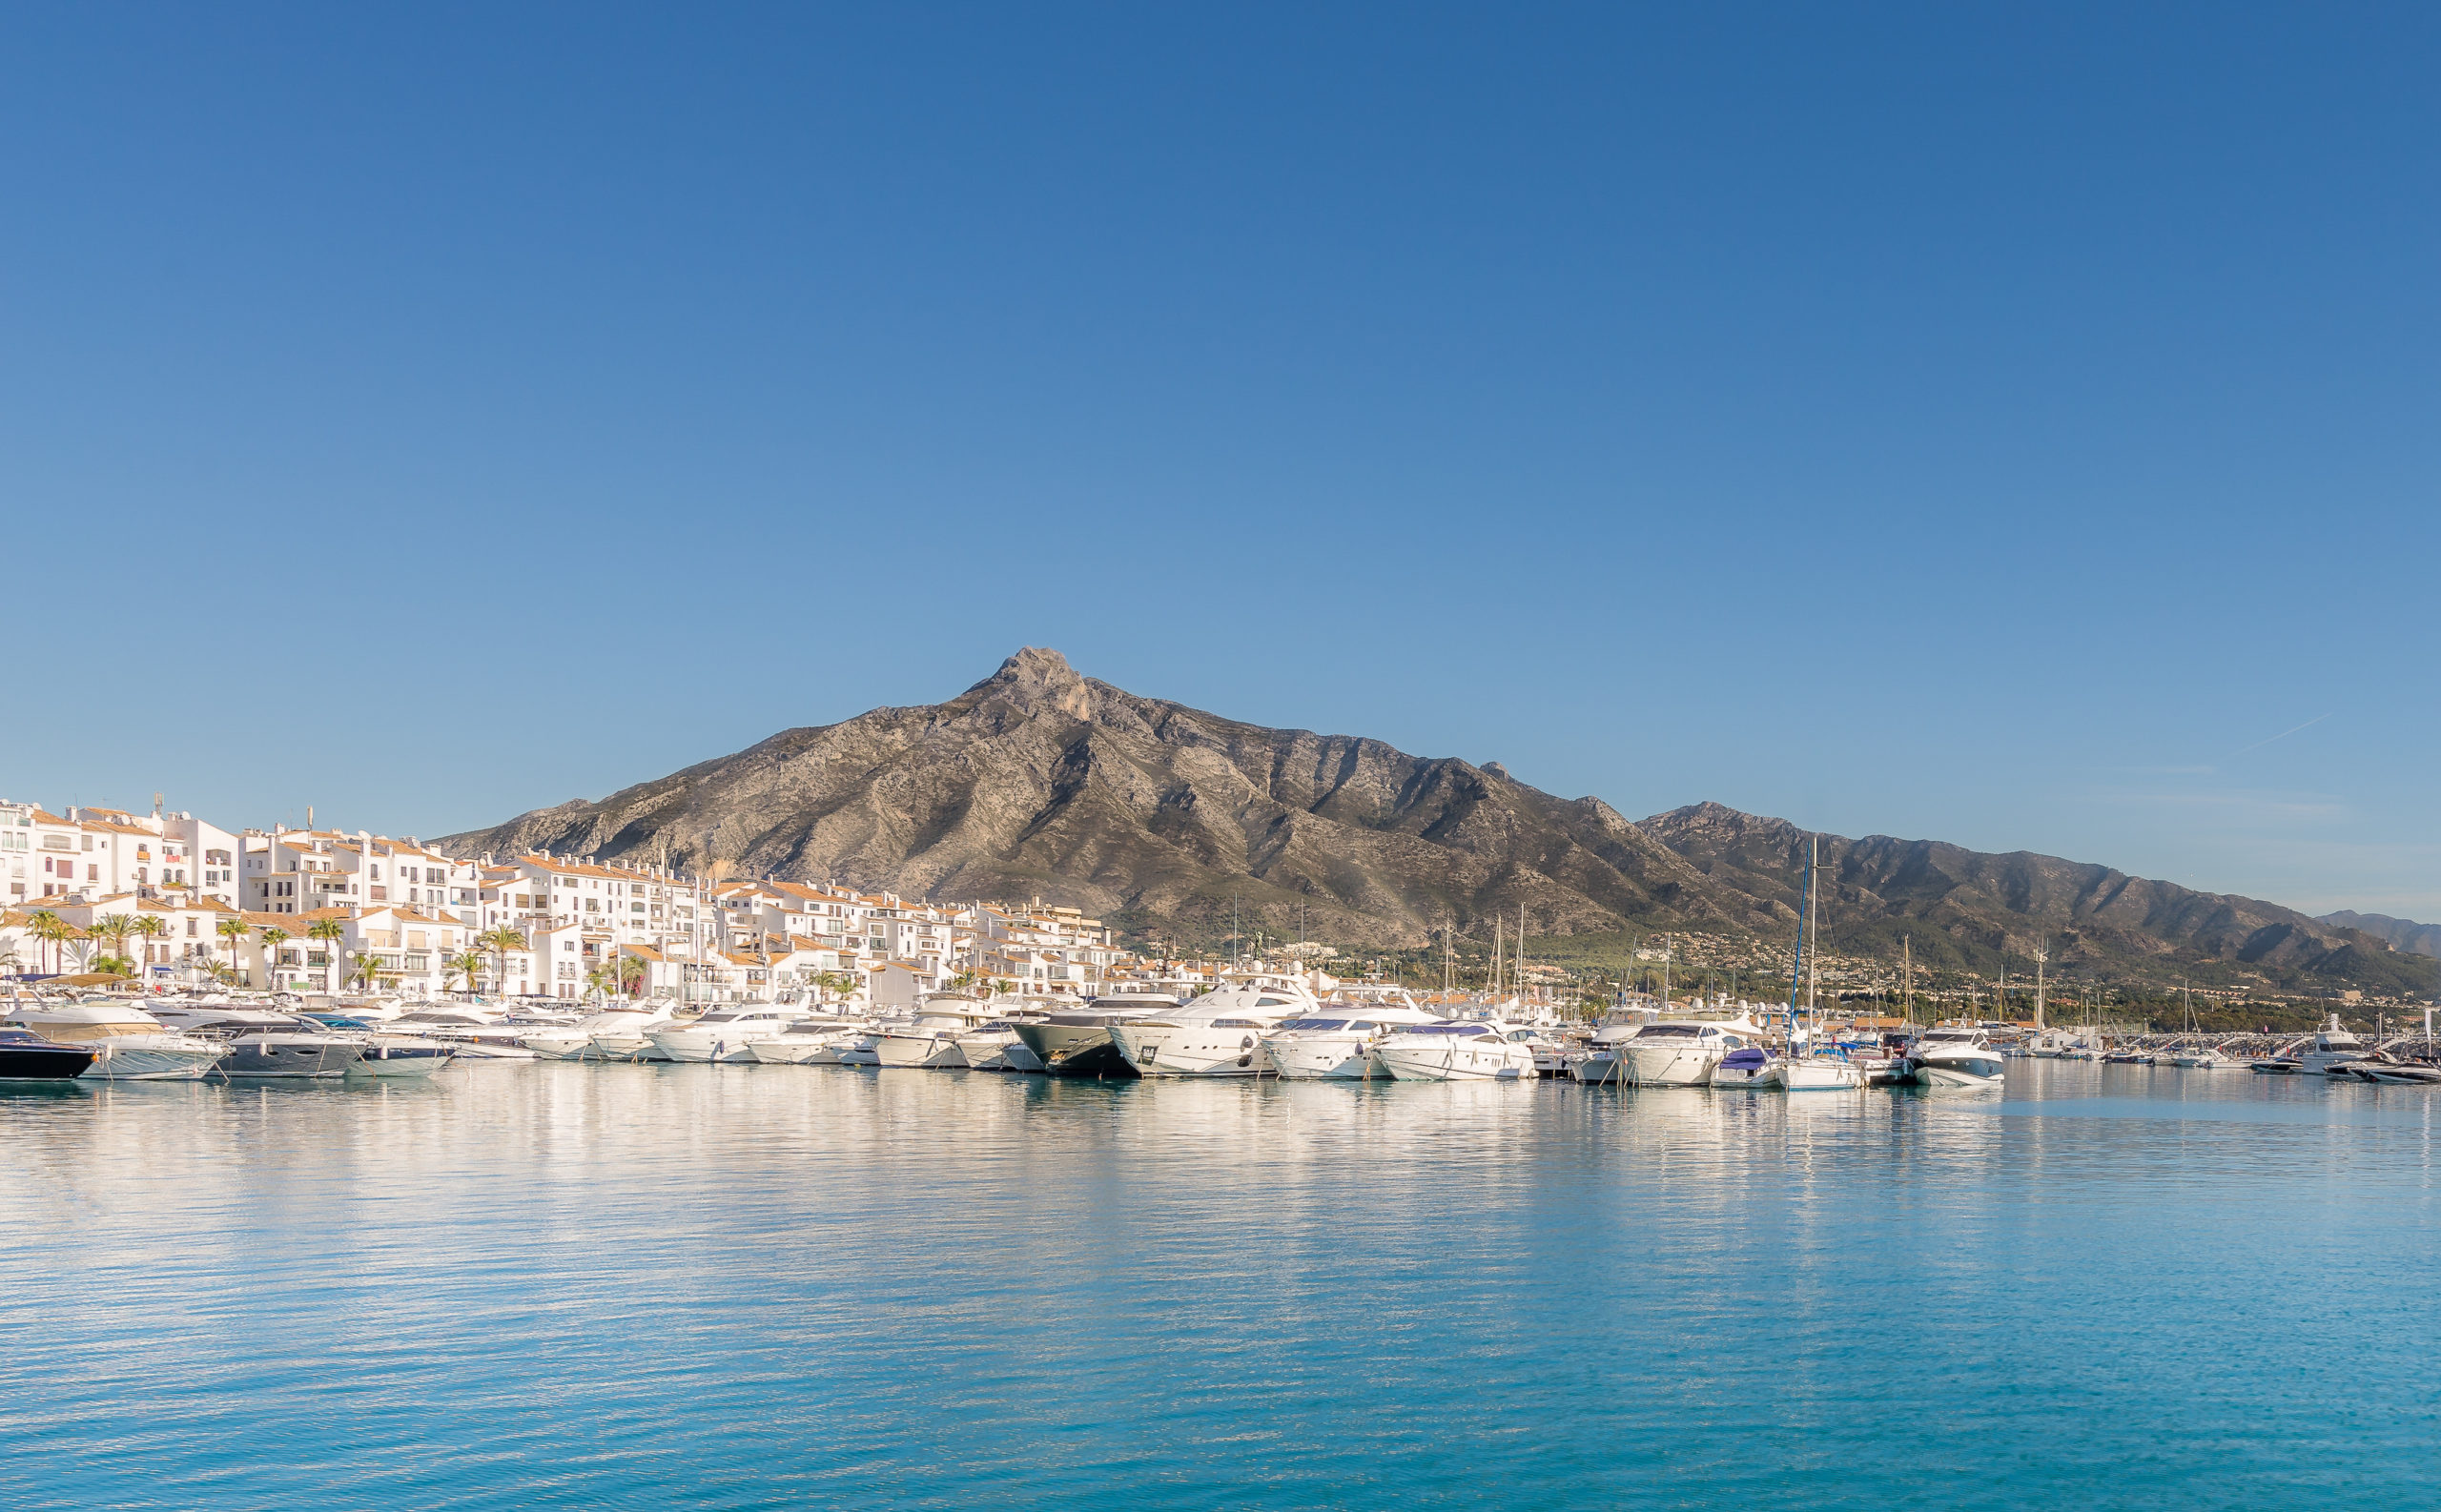 A Complete Guide of Puerto Banús - Things to do Around Sotogrande